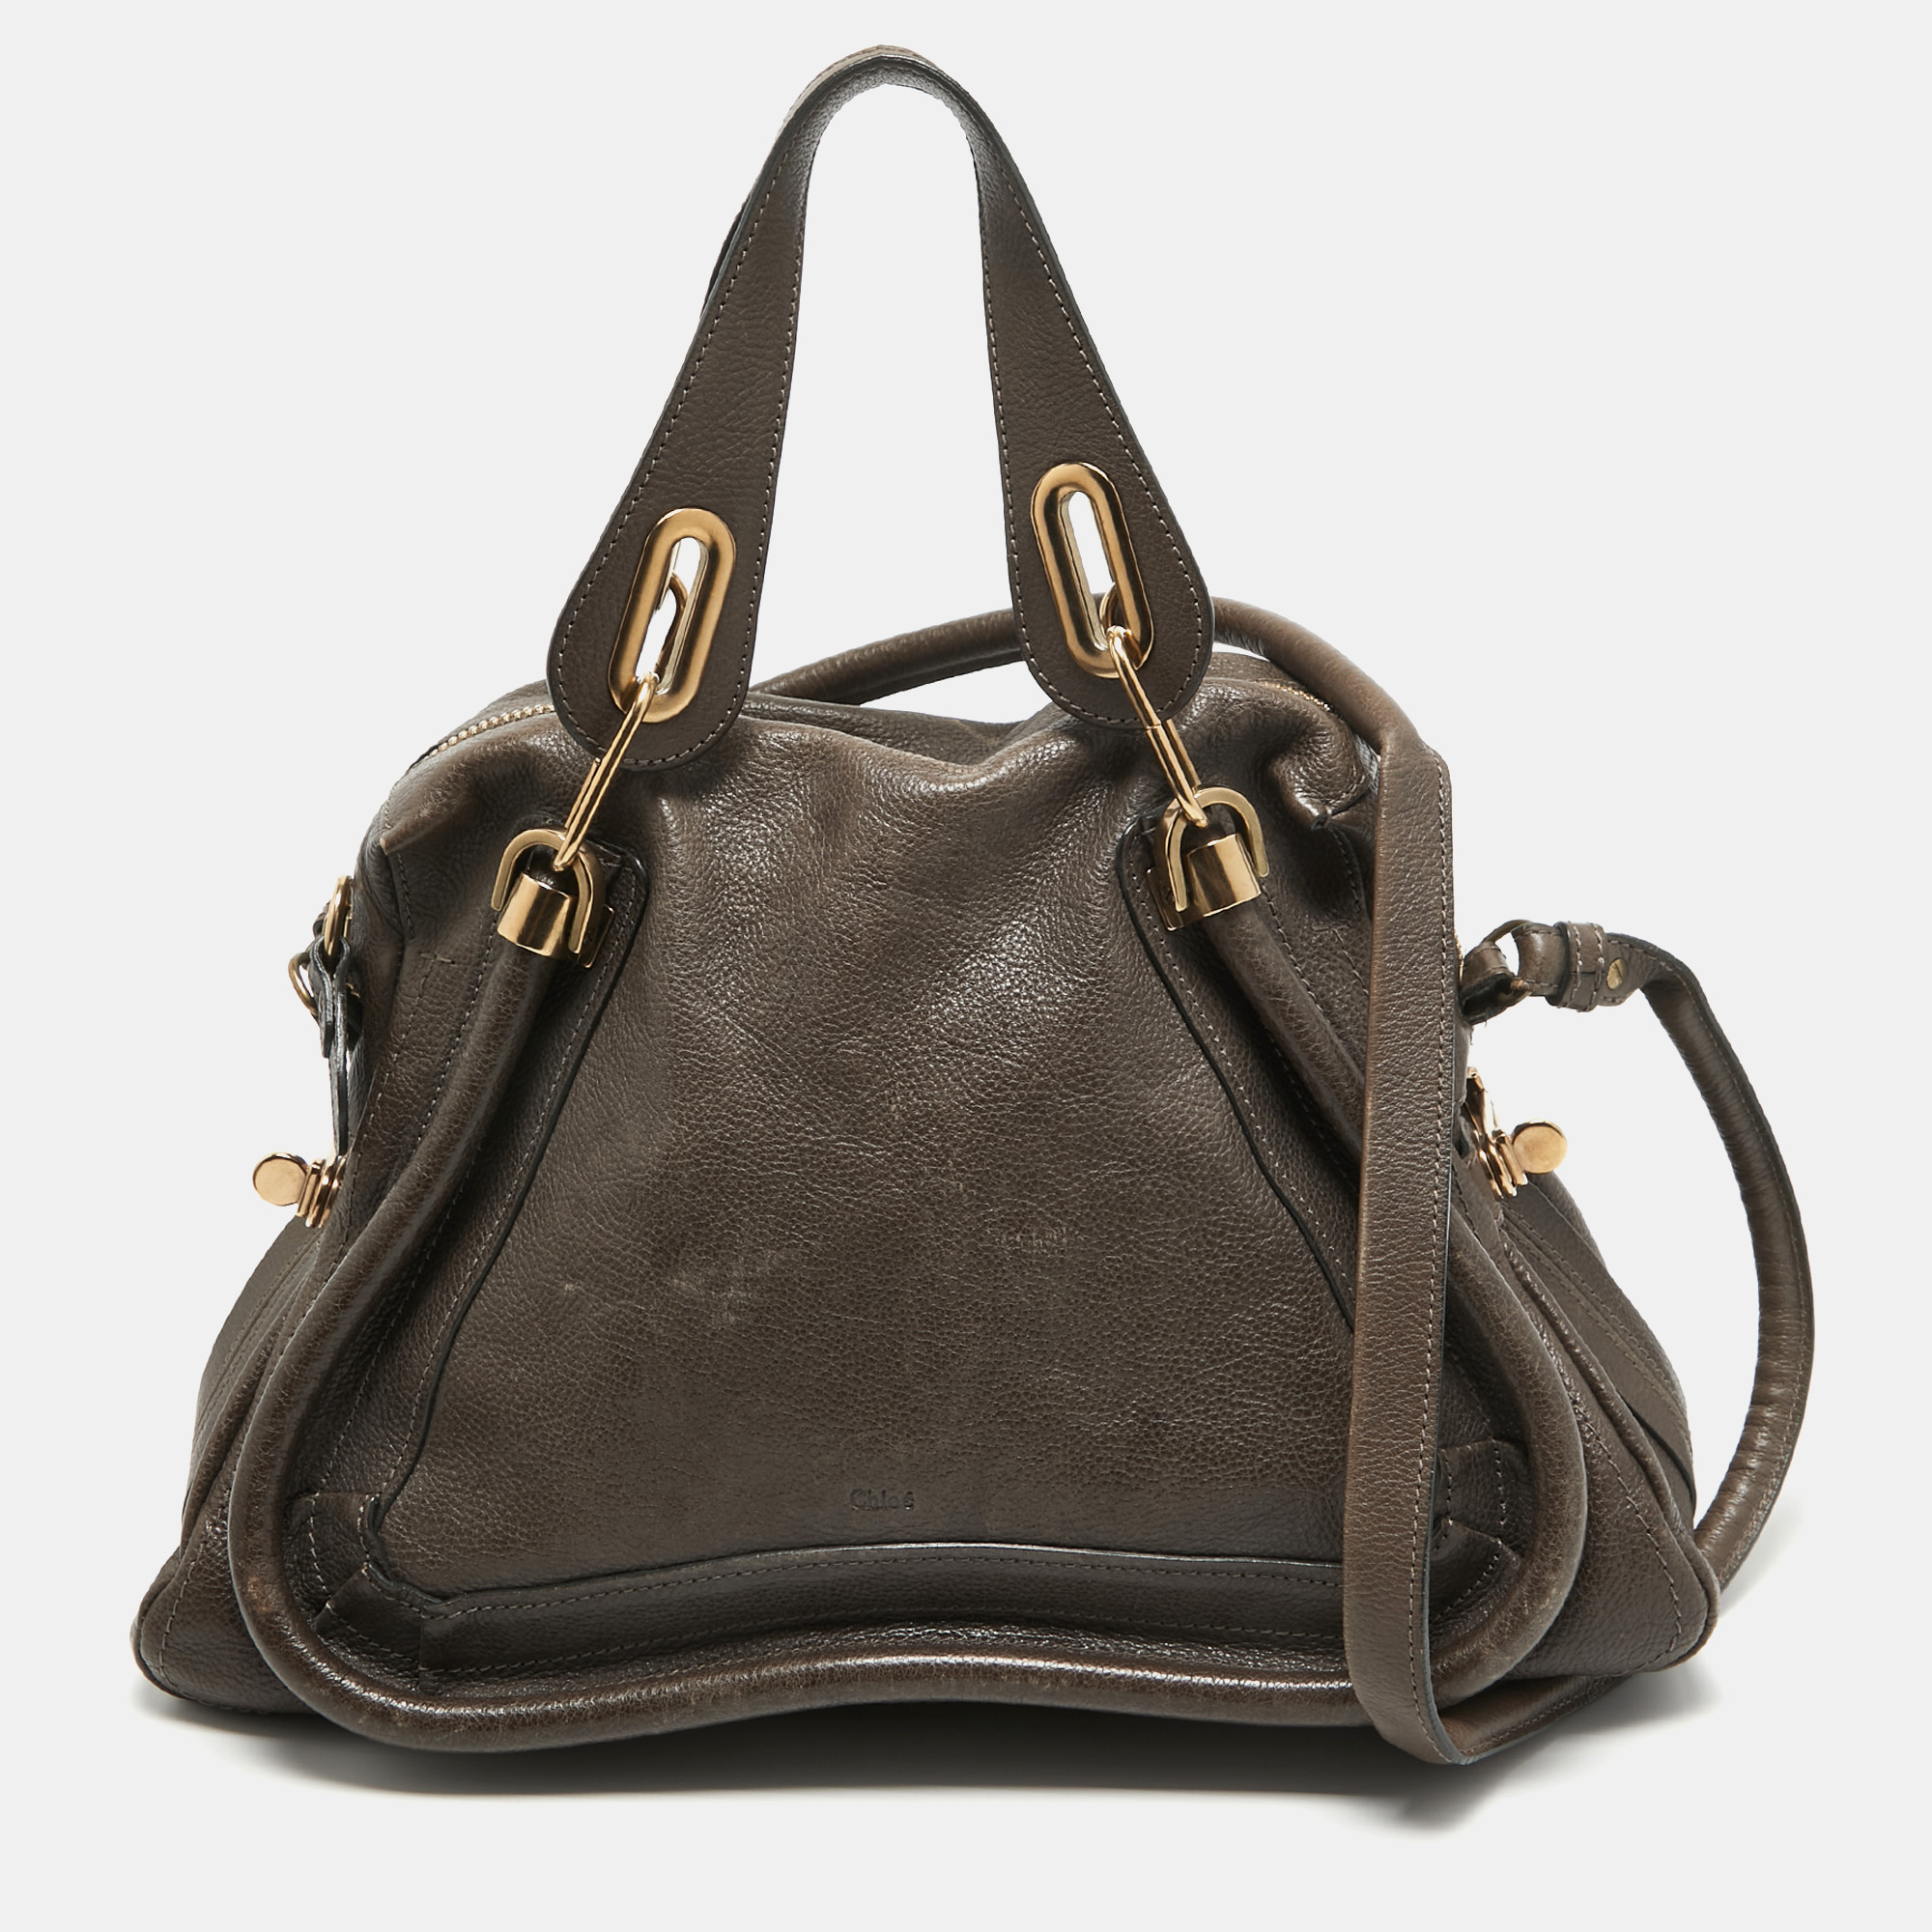 This Chloe Paraty satchel is rendered in the finest quality materials into an elegant design. Versatile and functional it is well sized for your daily use.